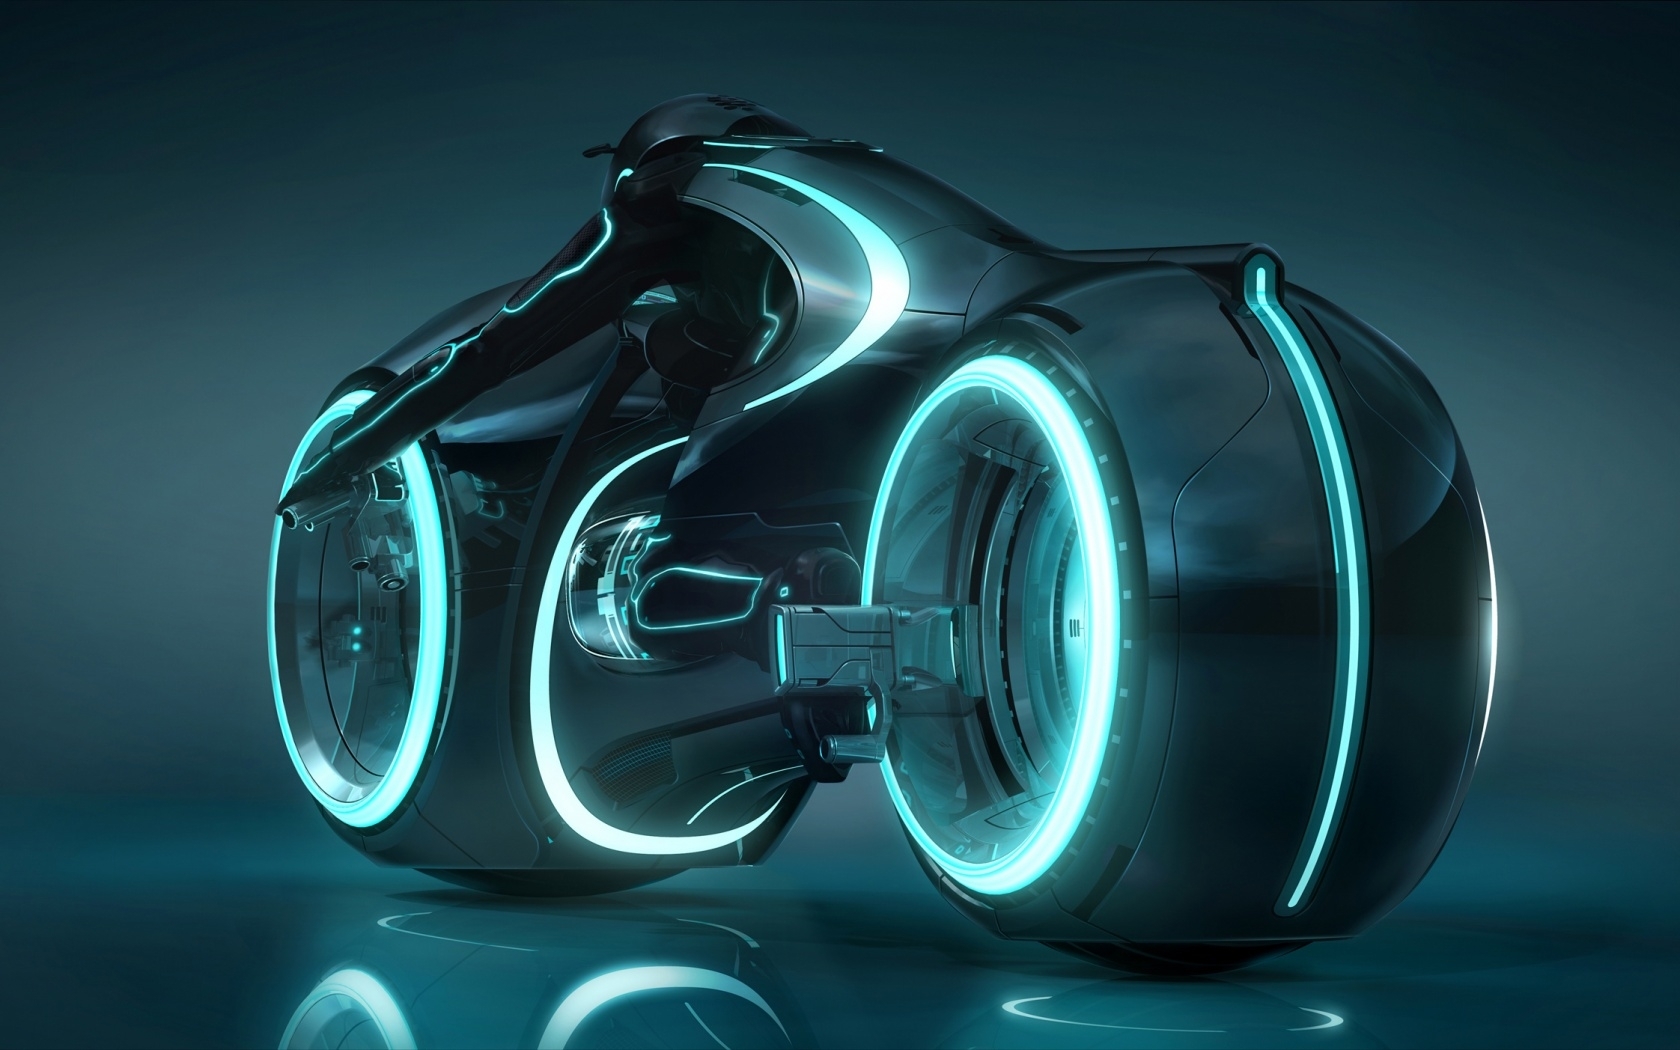 transport, motorcycles, prototypes, turquoise